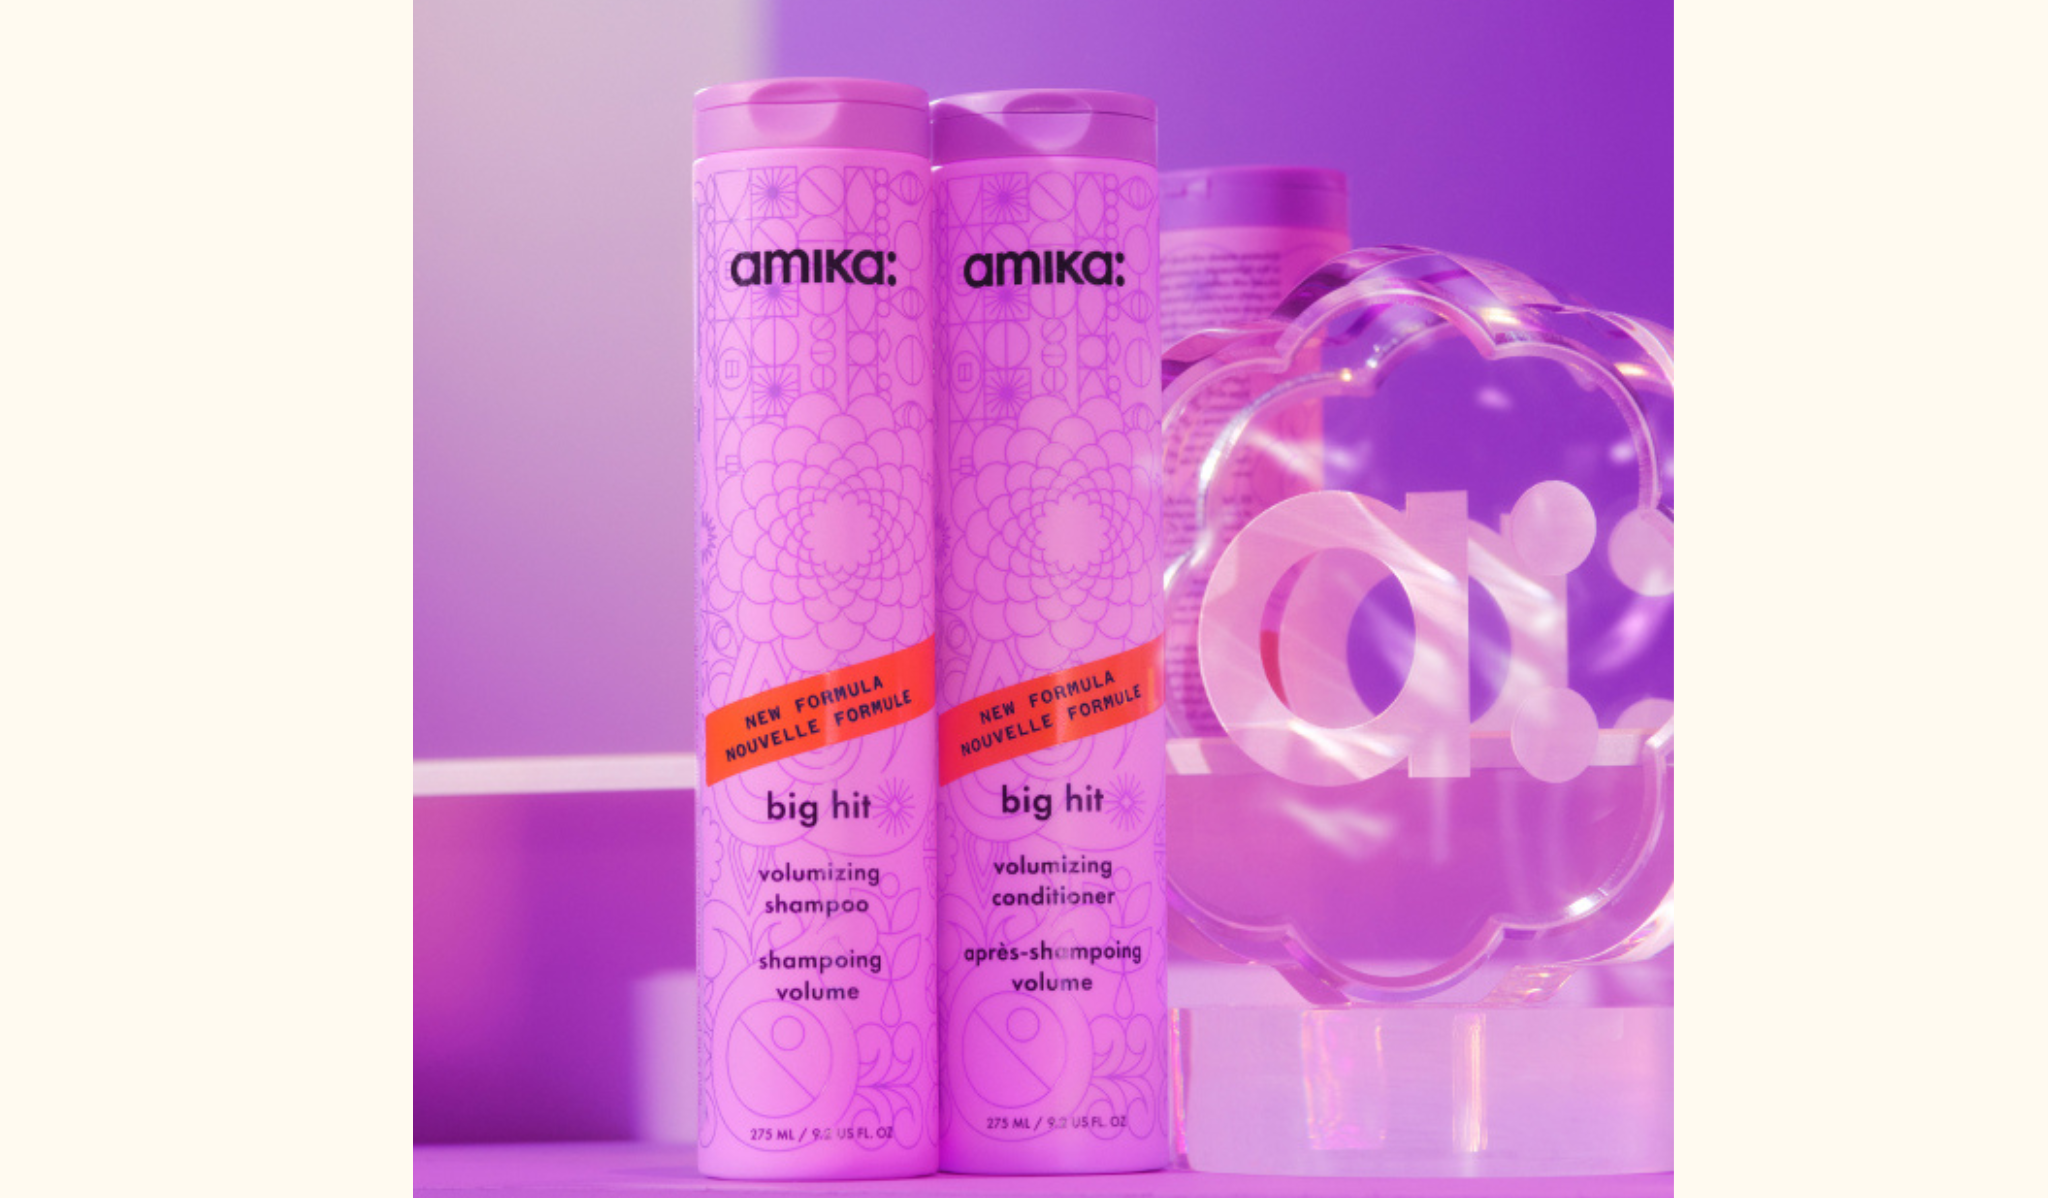 image of a close-up display of Amika's "Big Hit" volumizing shampoo and conditioner bottles set against a purple background. The two tall, decorative bottles are prominently positioned side by side, showcasing their intricate patterns and vibrant packaging. Behind the bottles, a clear decorative piece with the Amika logo is visible, adding to the brand's playful and stylish aesthetic.